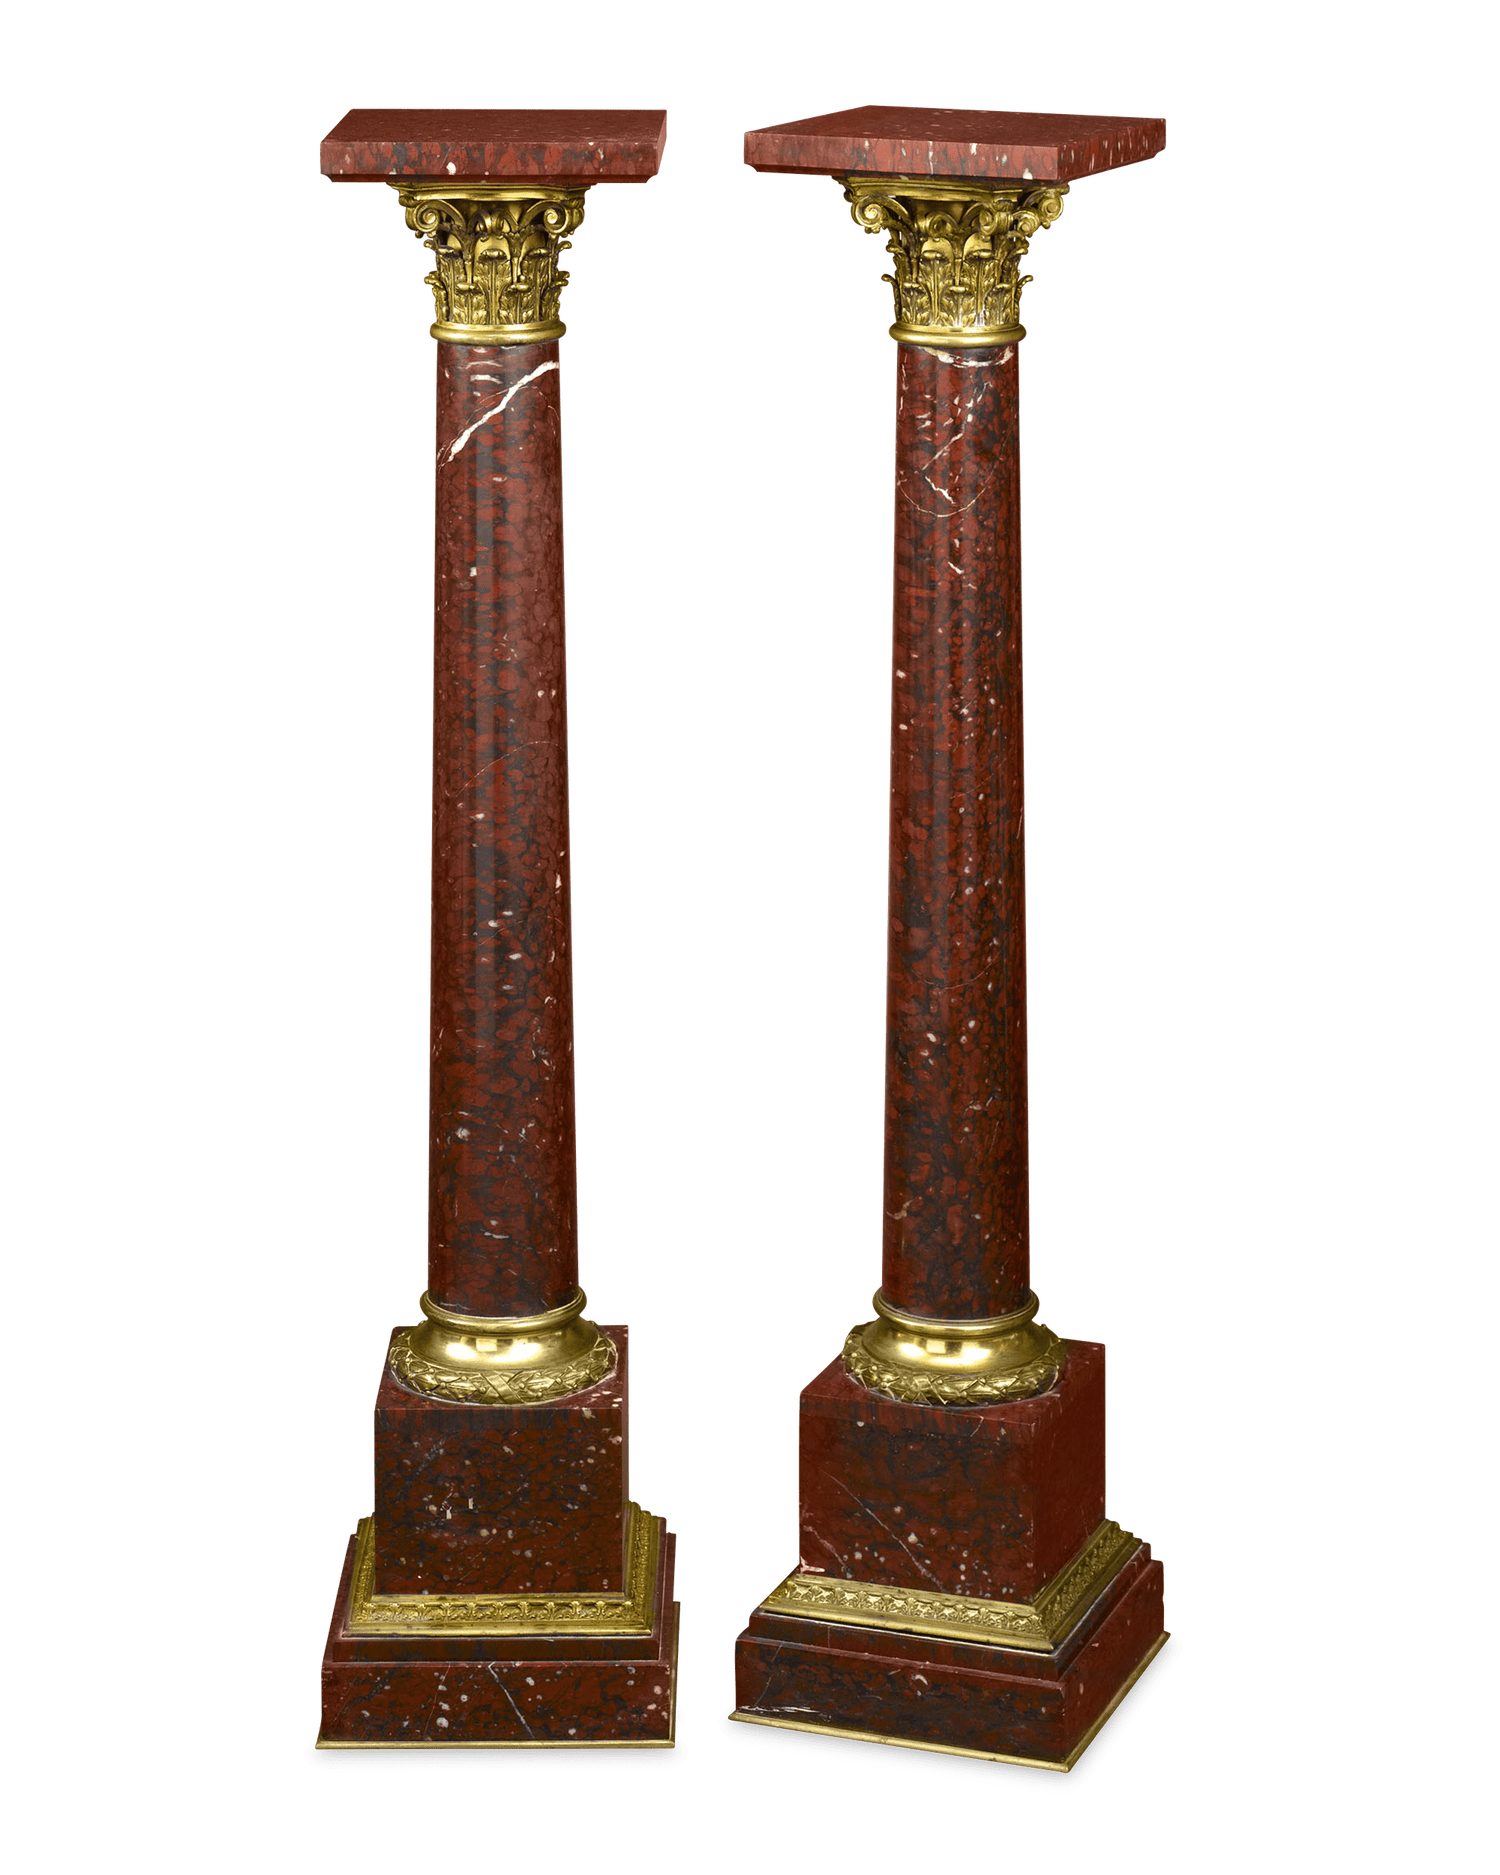 Crafted of rouge griotte marble, these pedestals take the form of Corinthian columns